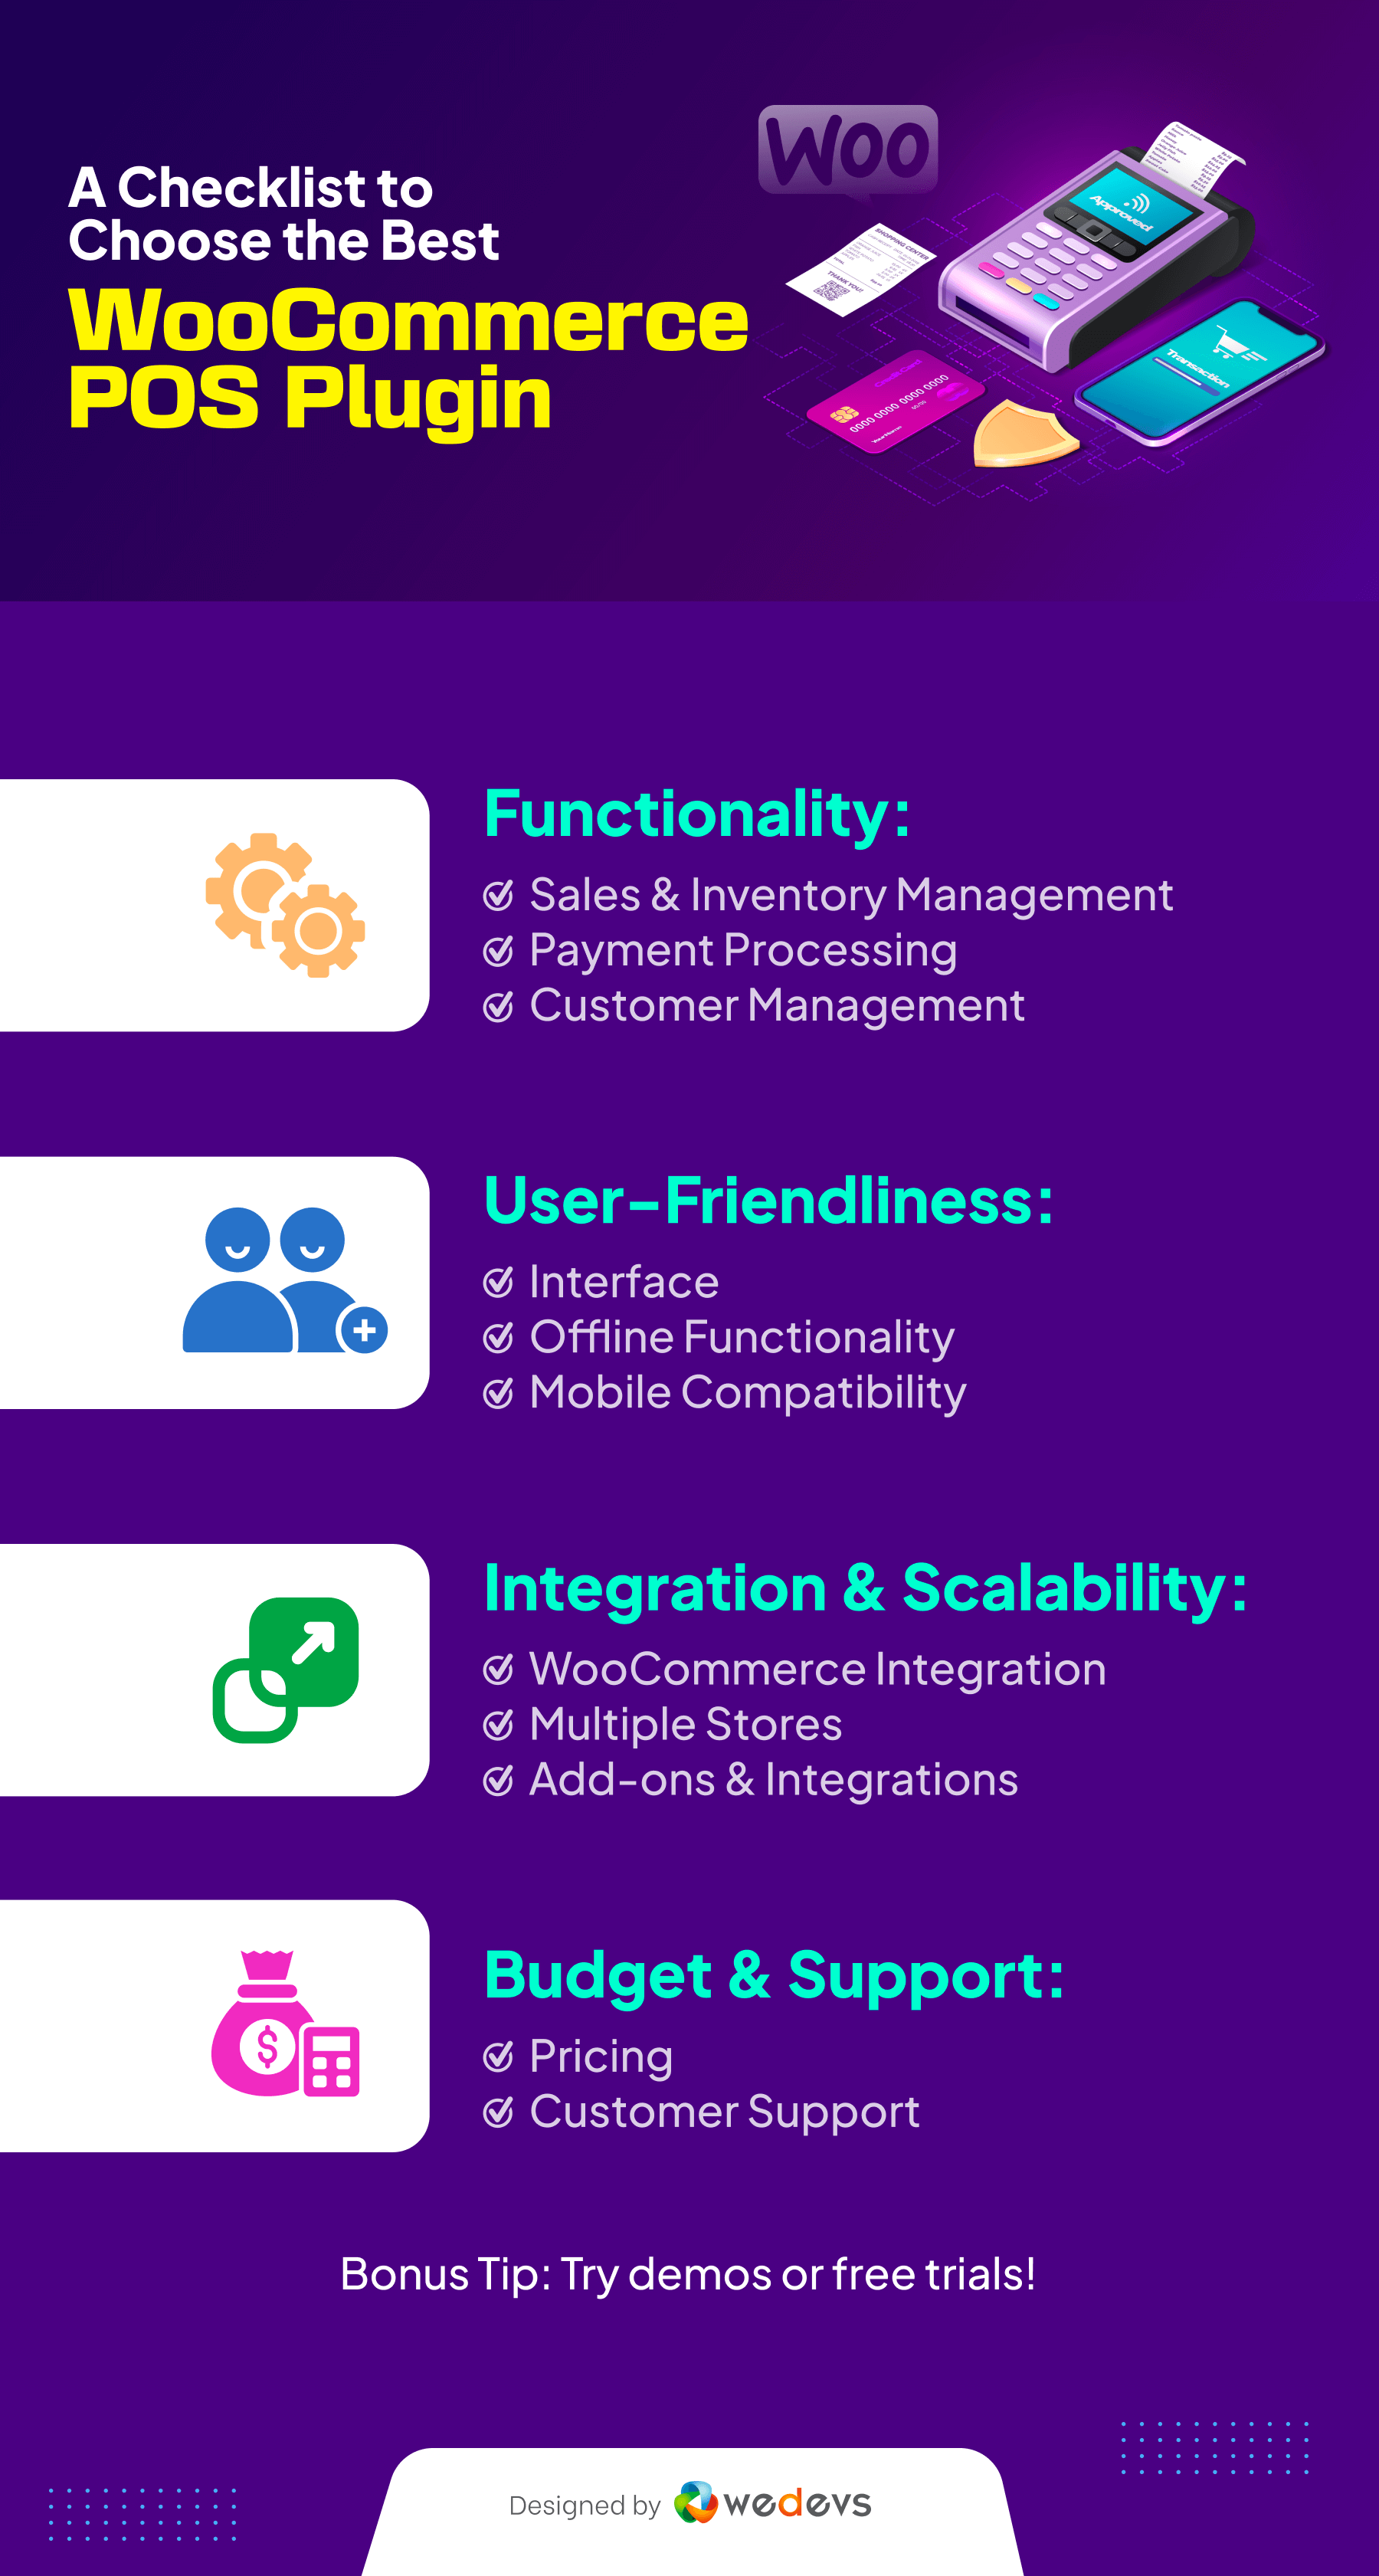 This is an infographic that shows a checklist to choose the best WooCommerce POS plugin